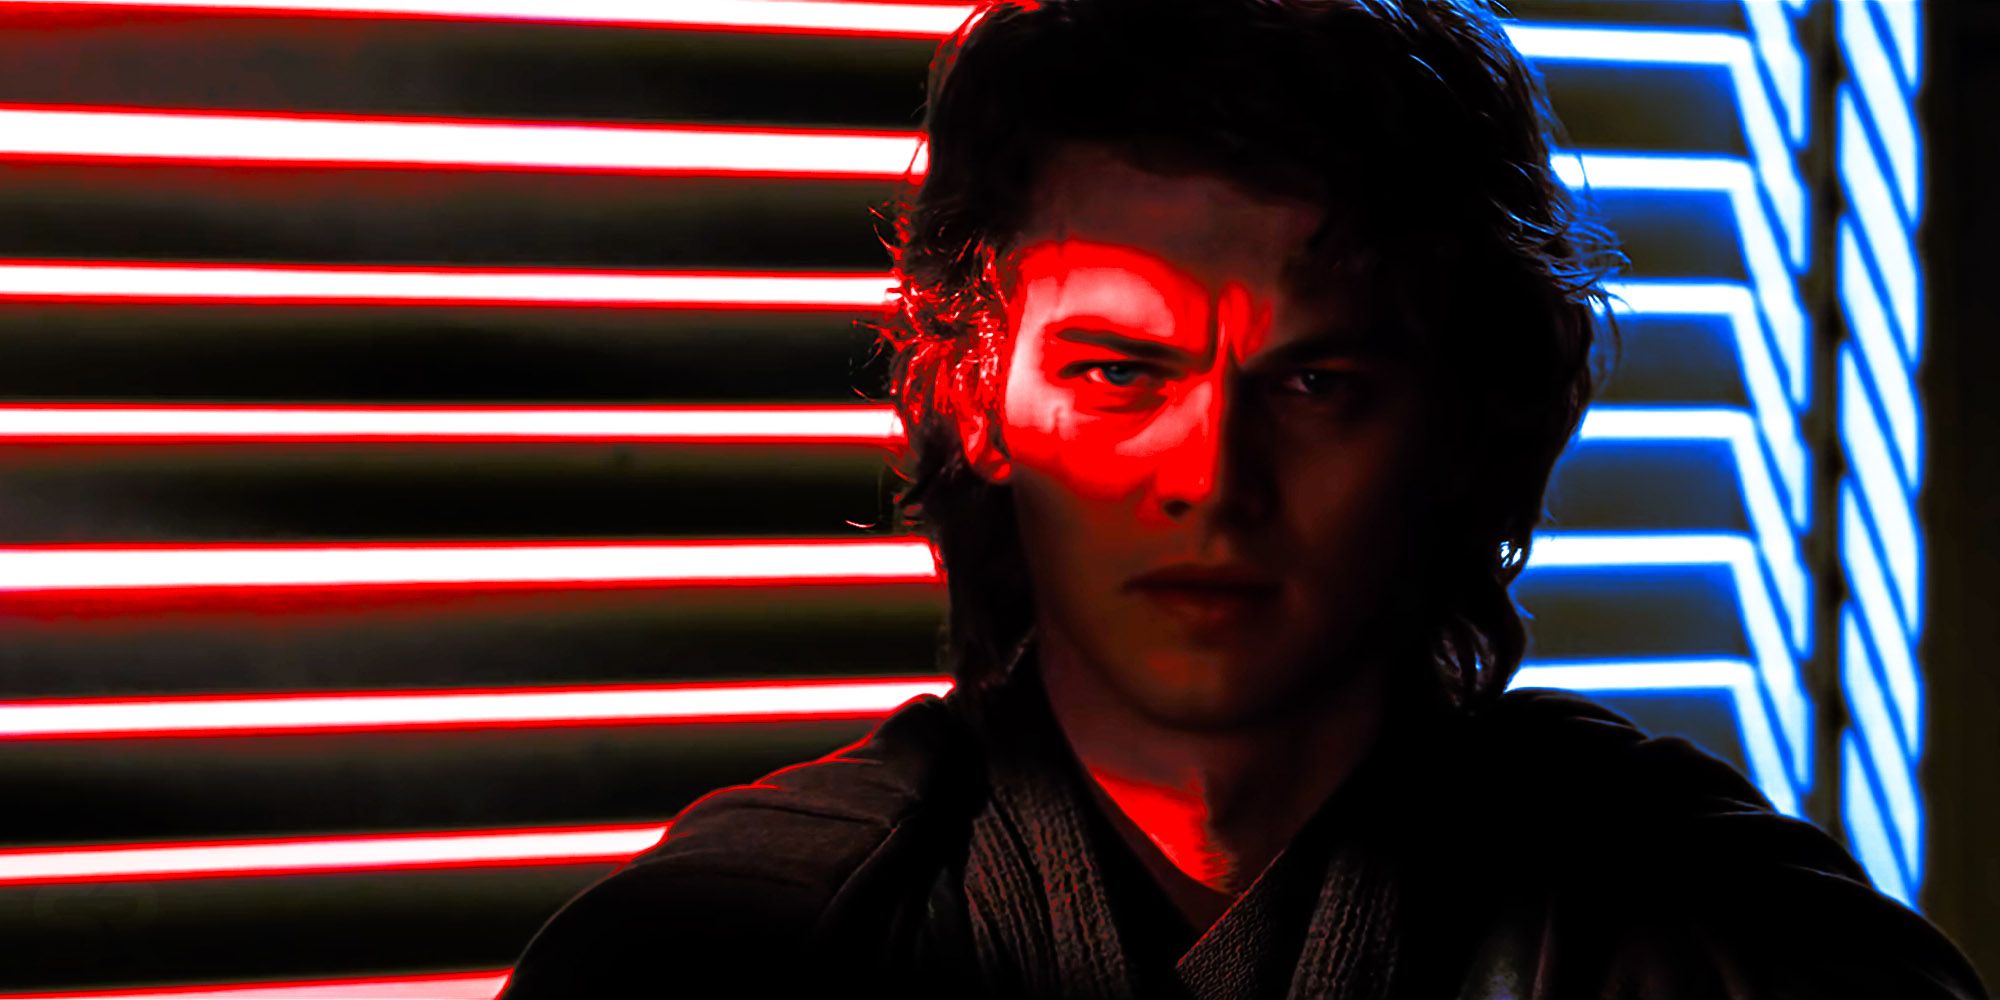 What if Anakin was played by Leonardo DiCaprio In The Star Wars Prequels